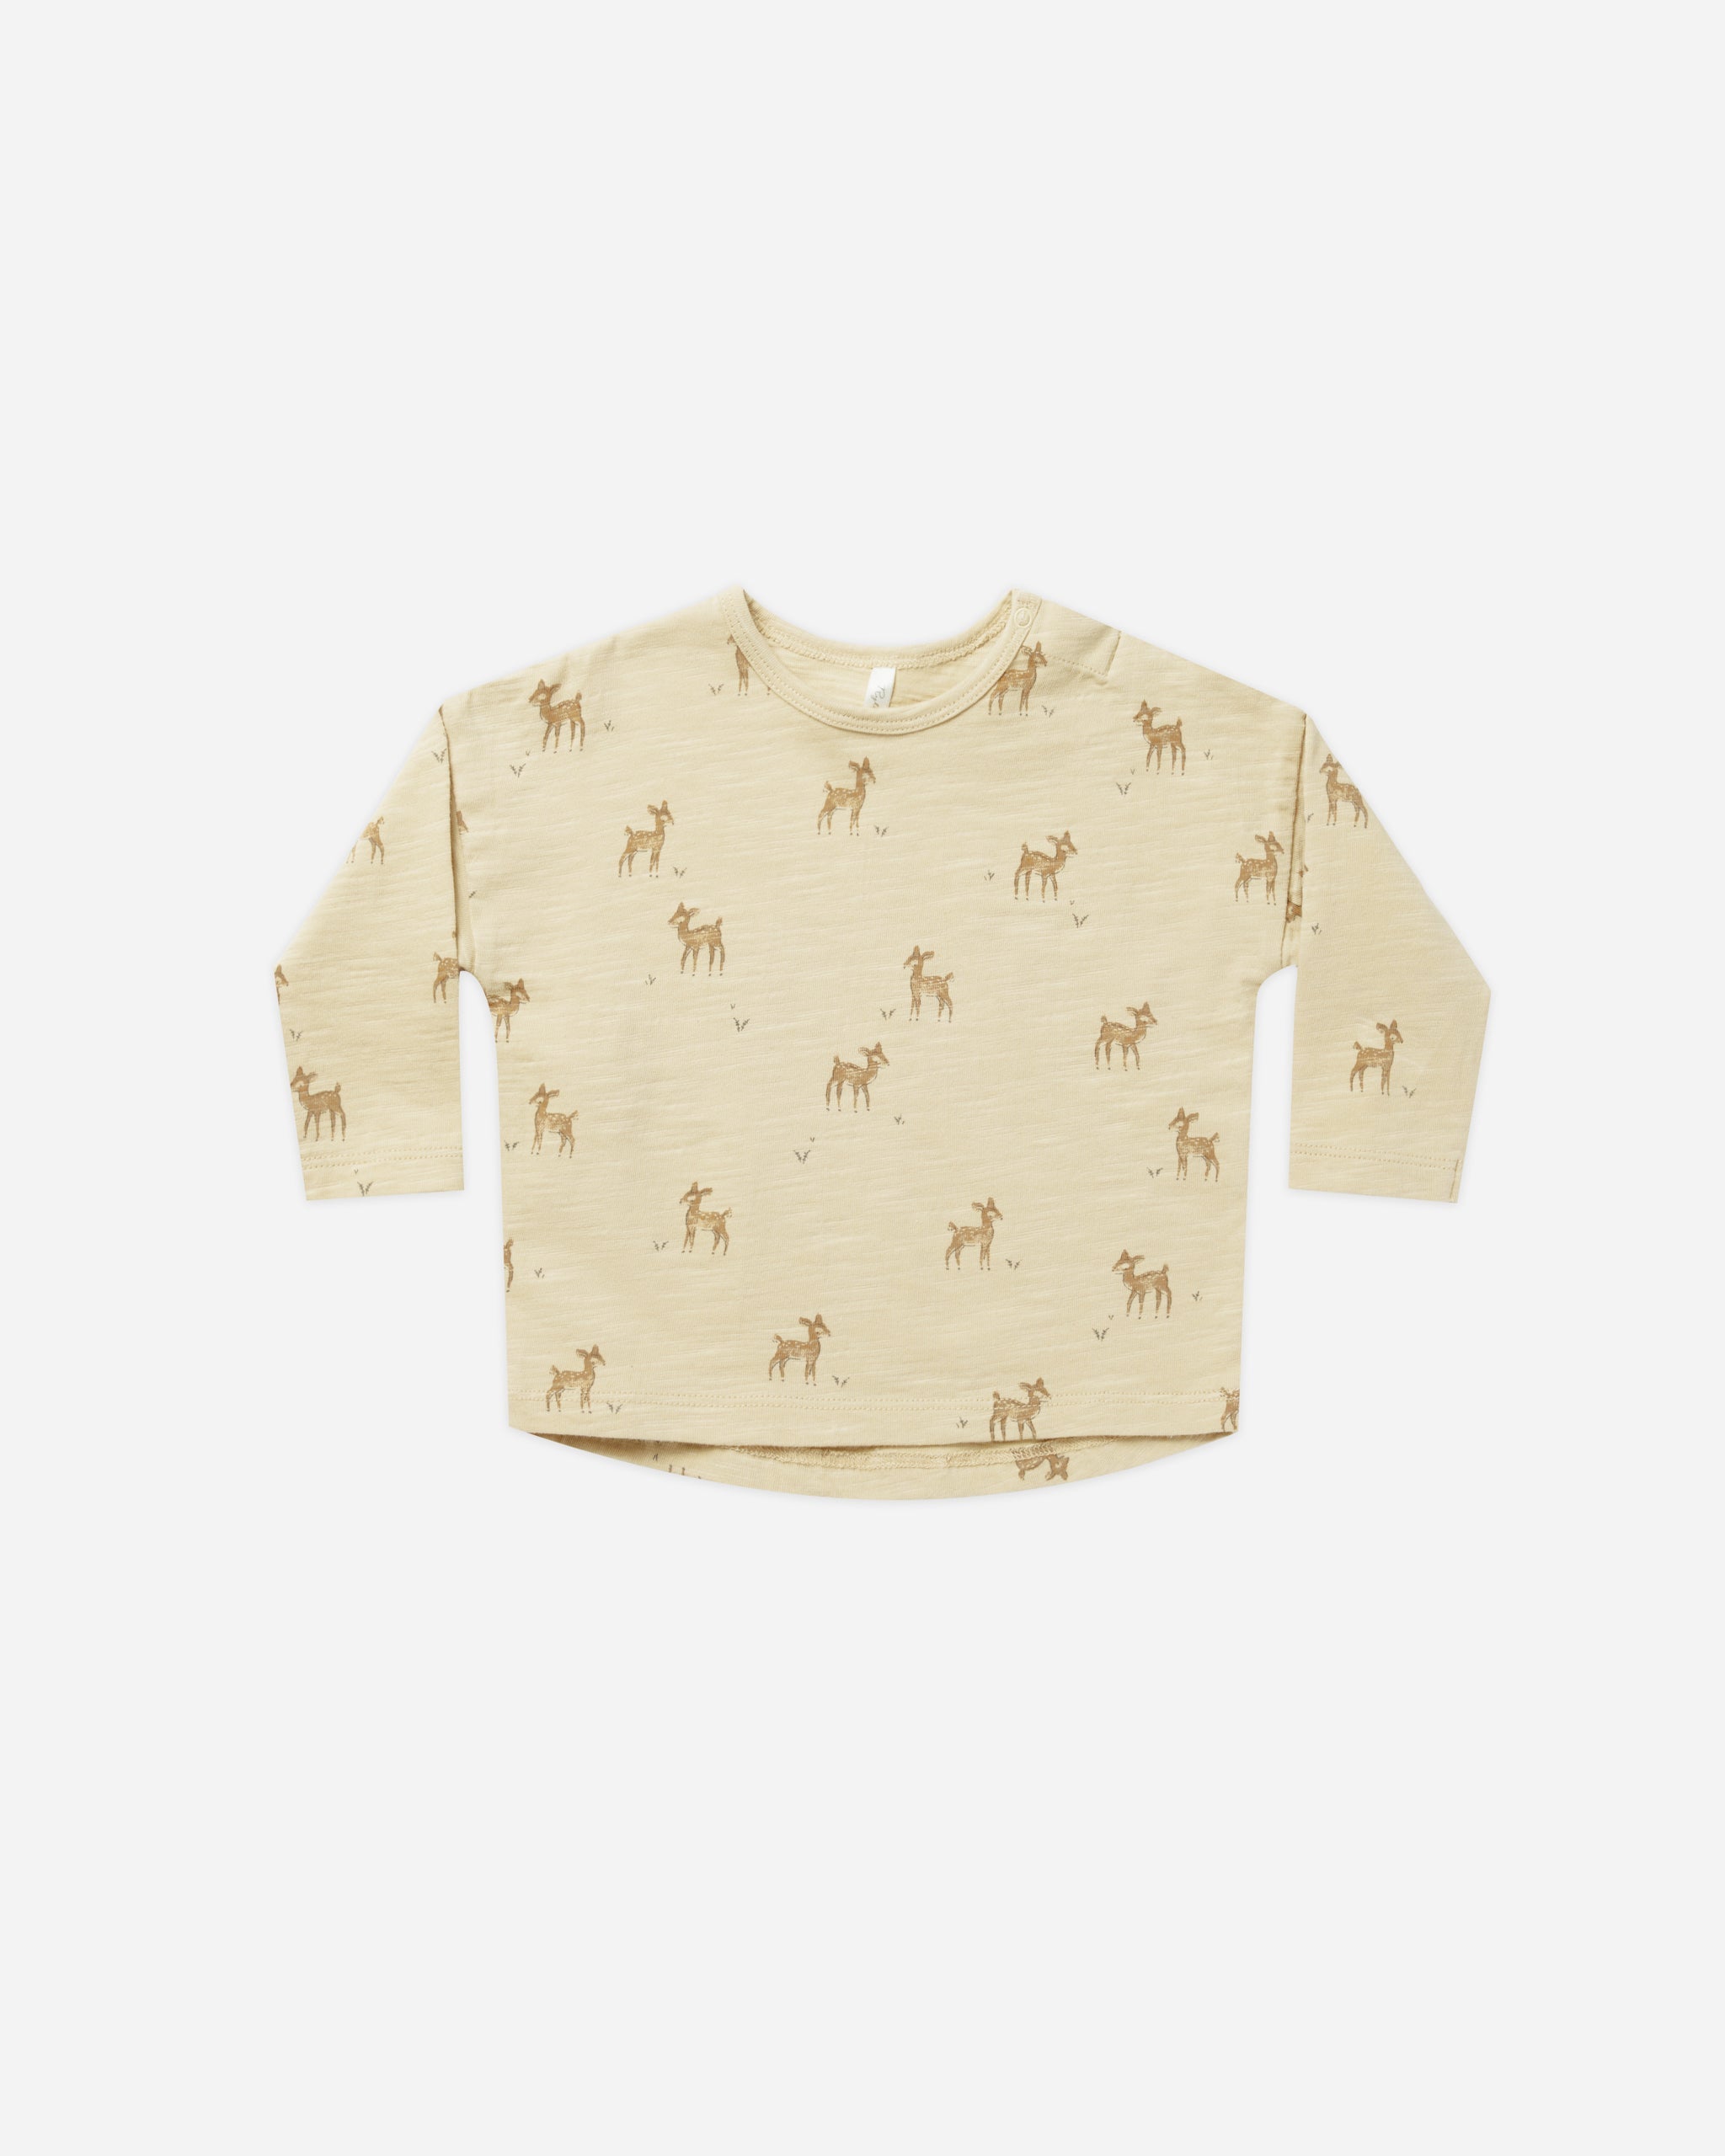 Long Sleeve Tee || Deer - Rylee + Cru | Kids Clothes | Trendy Baby Clothes | Modern Infant Outfits |